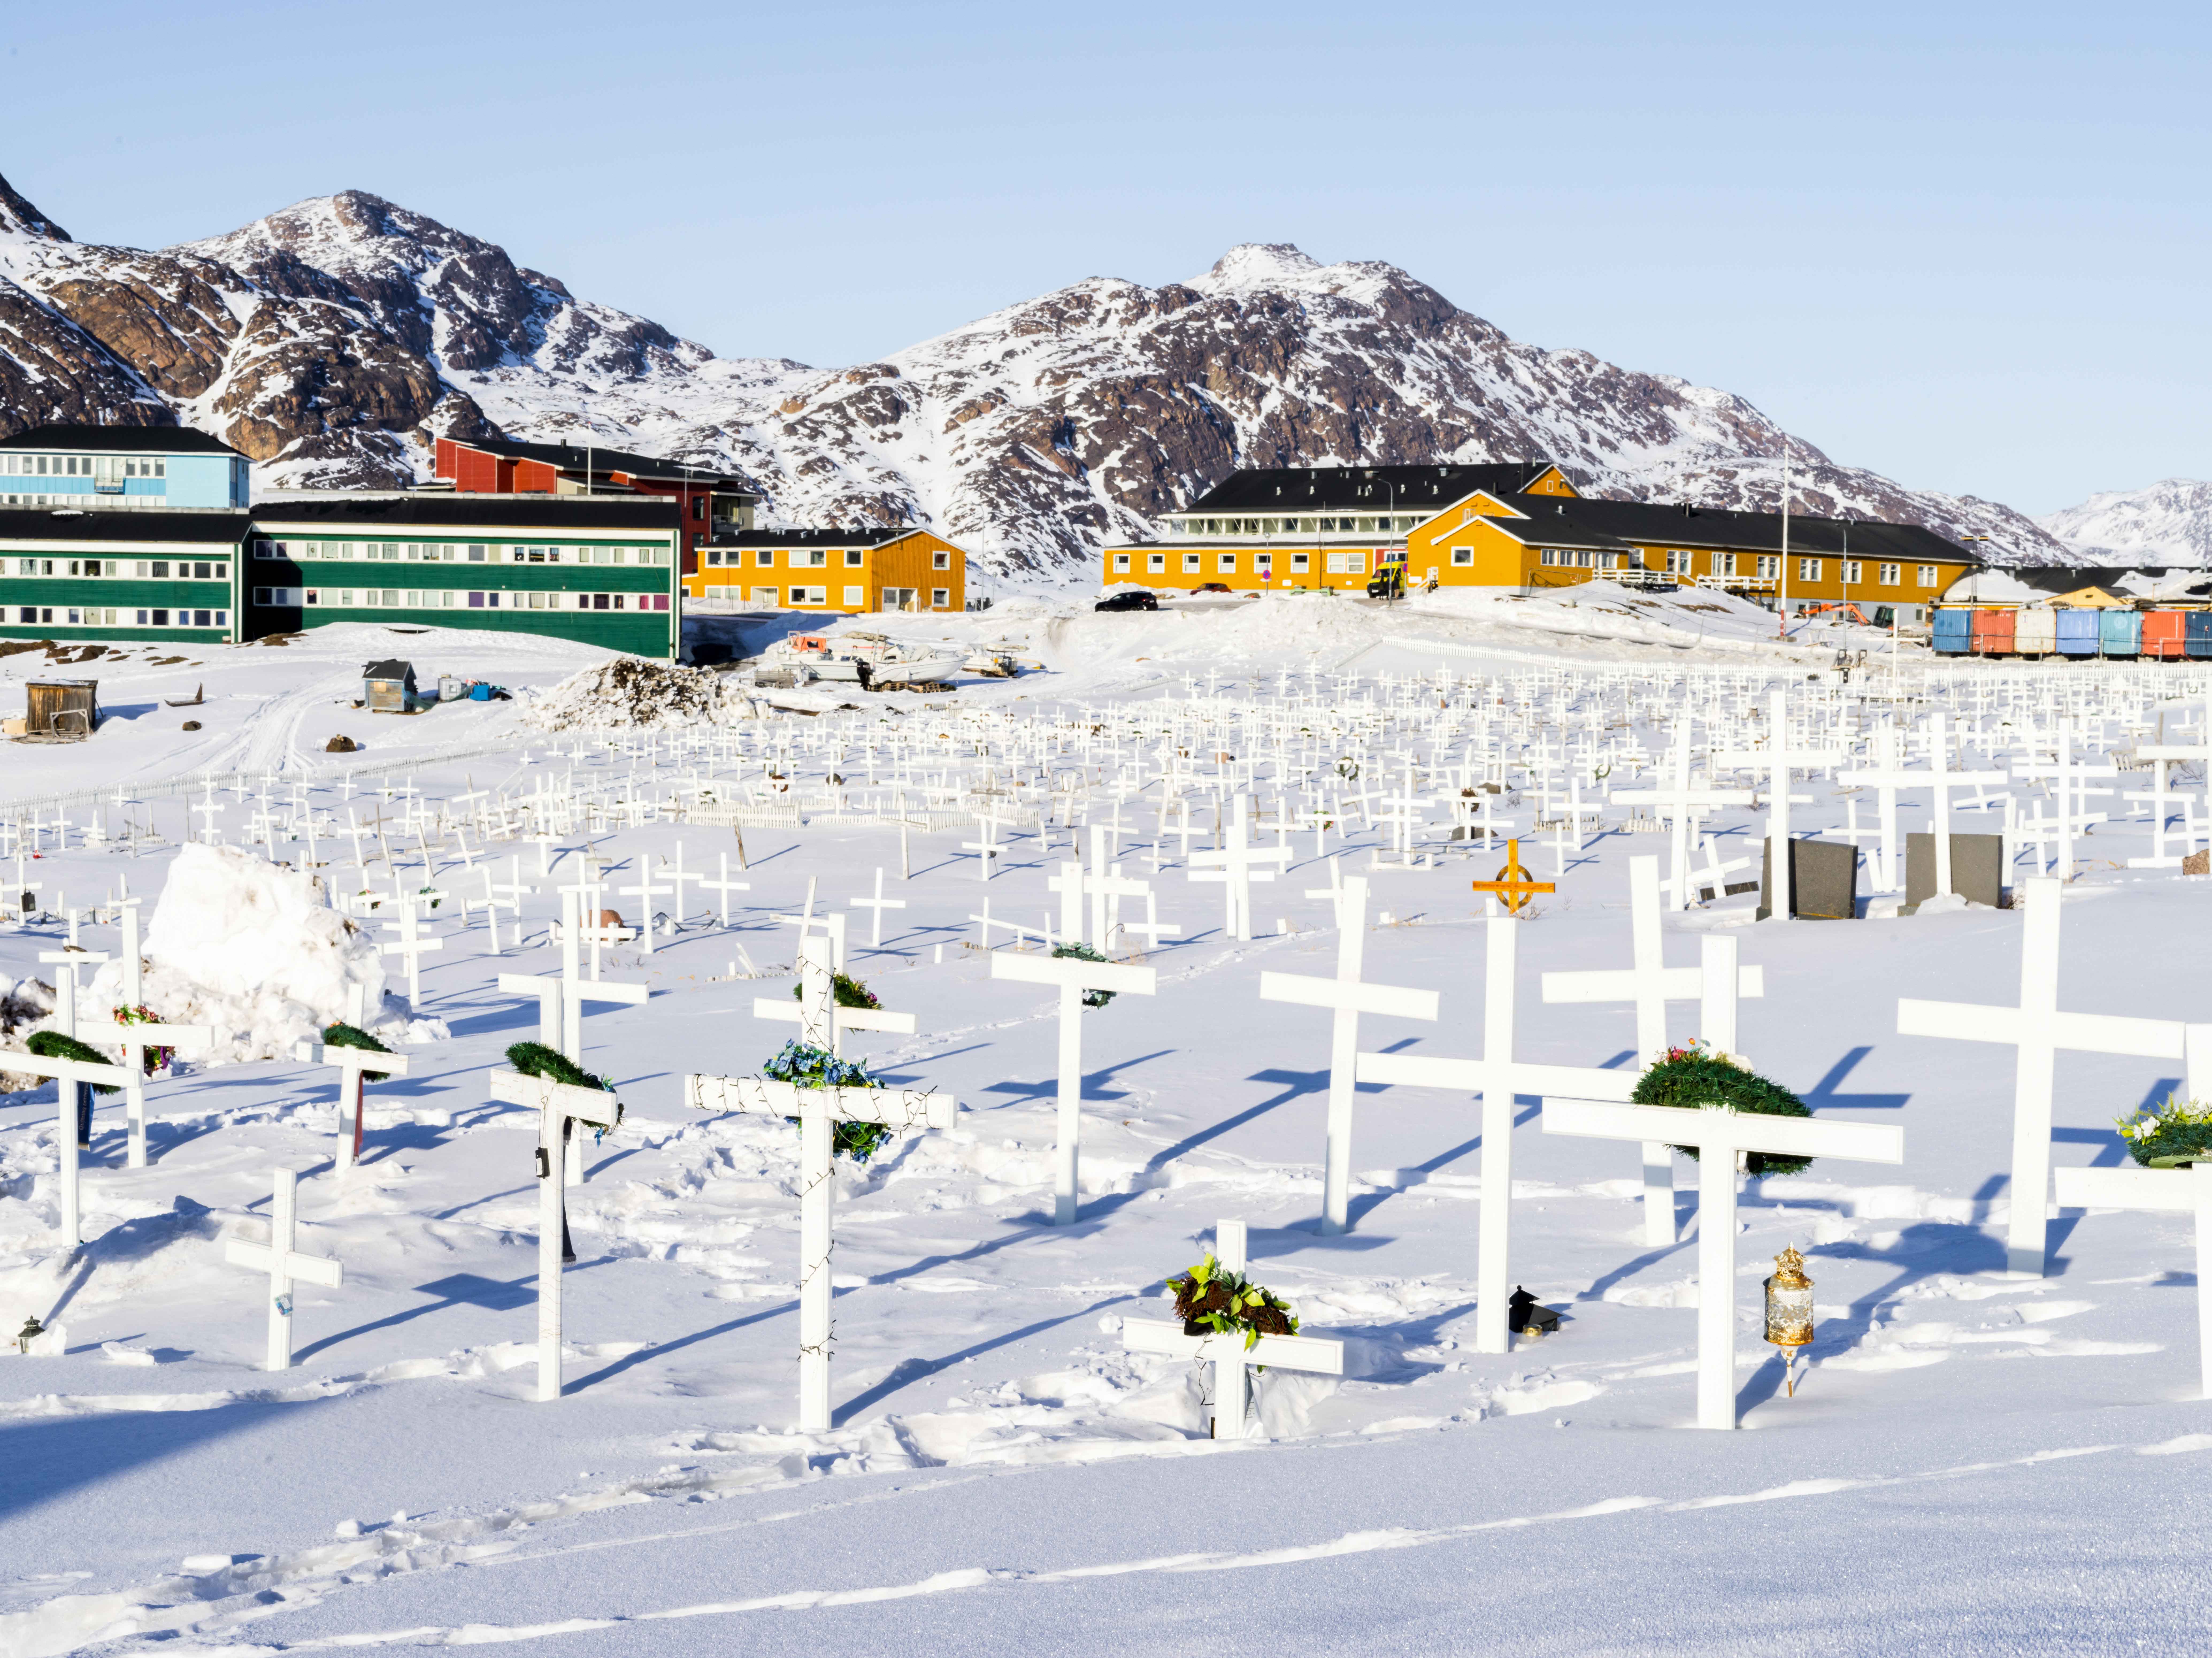 Simple white crosses mark graves in a snow covered cemetery with colorful buildings in the background.